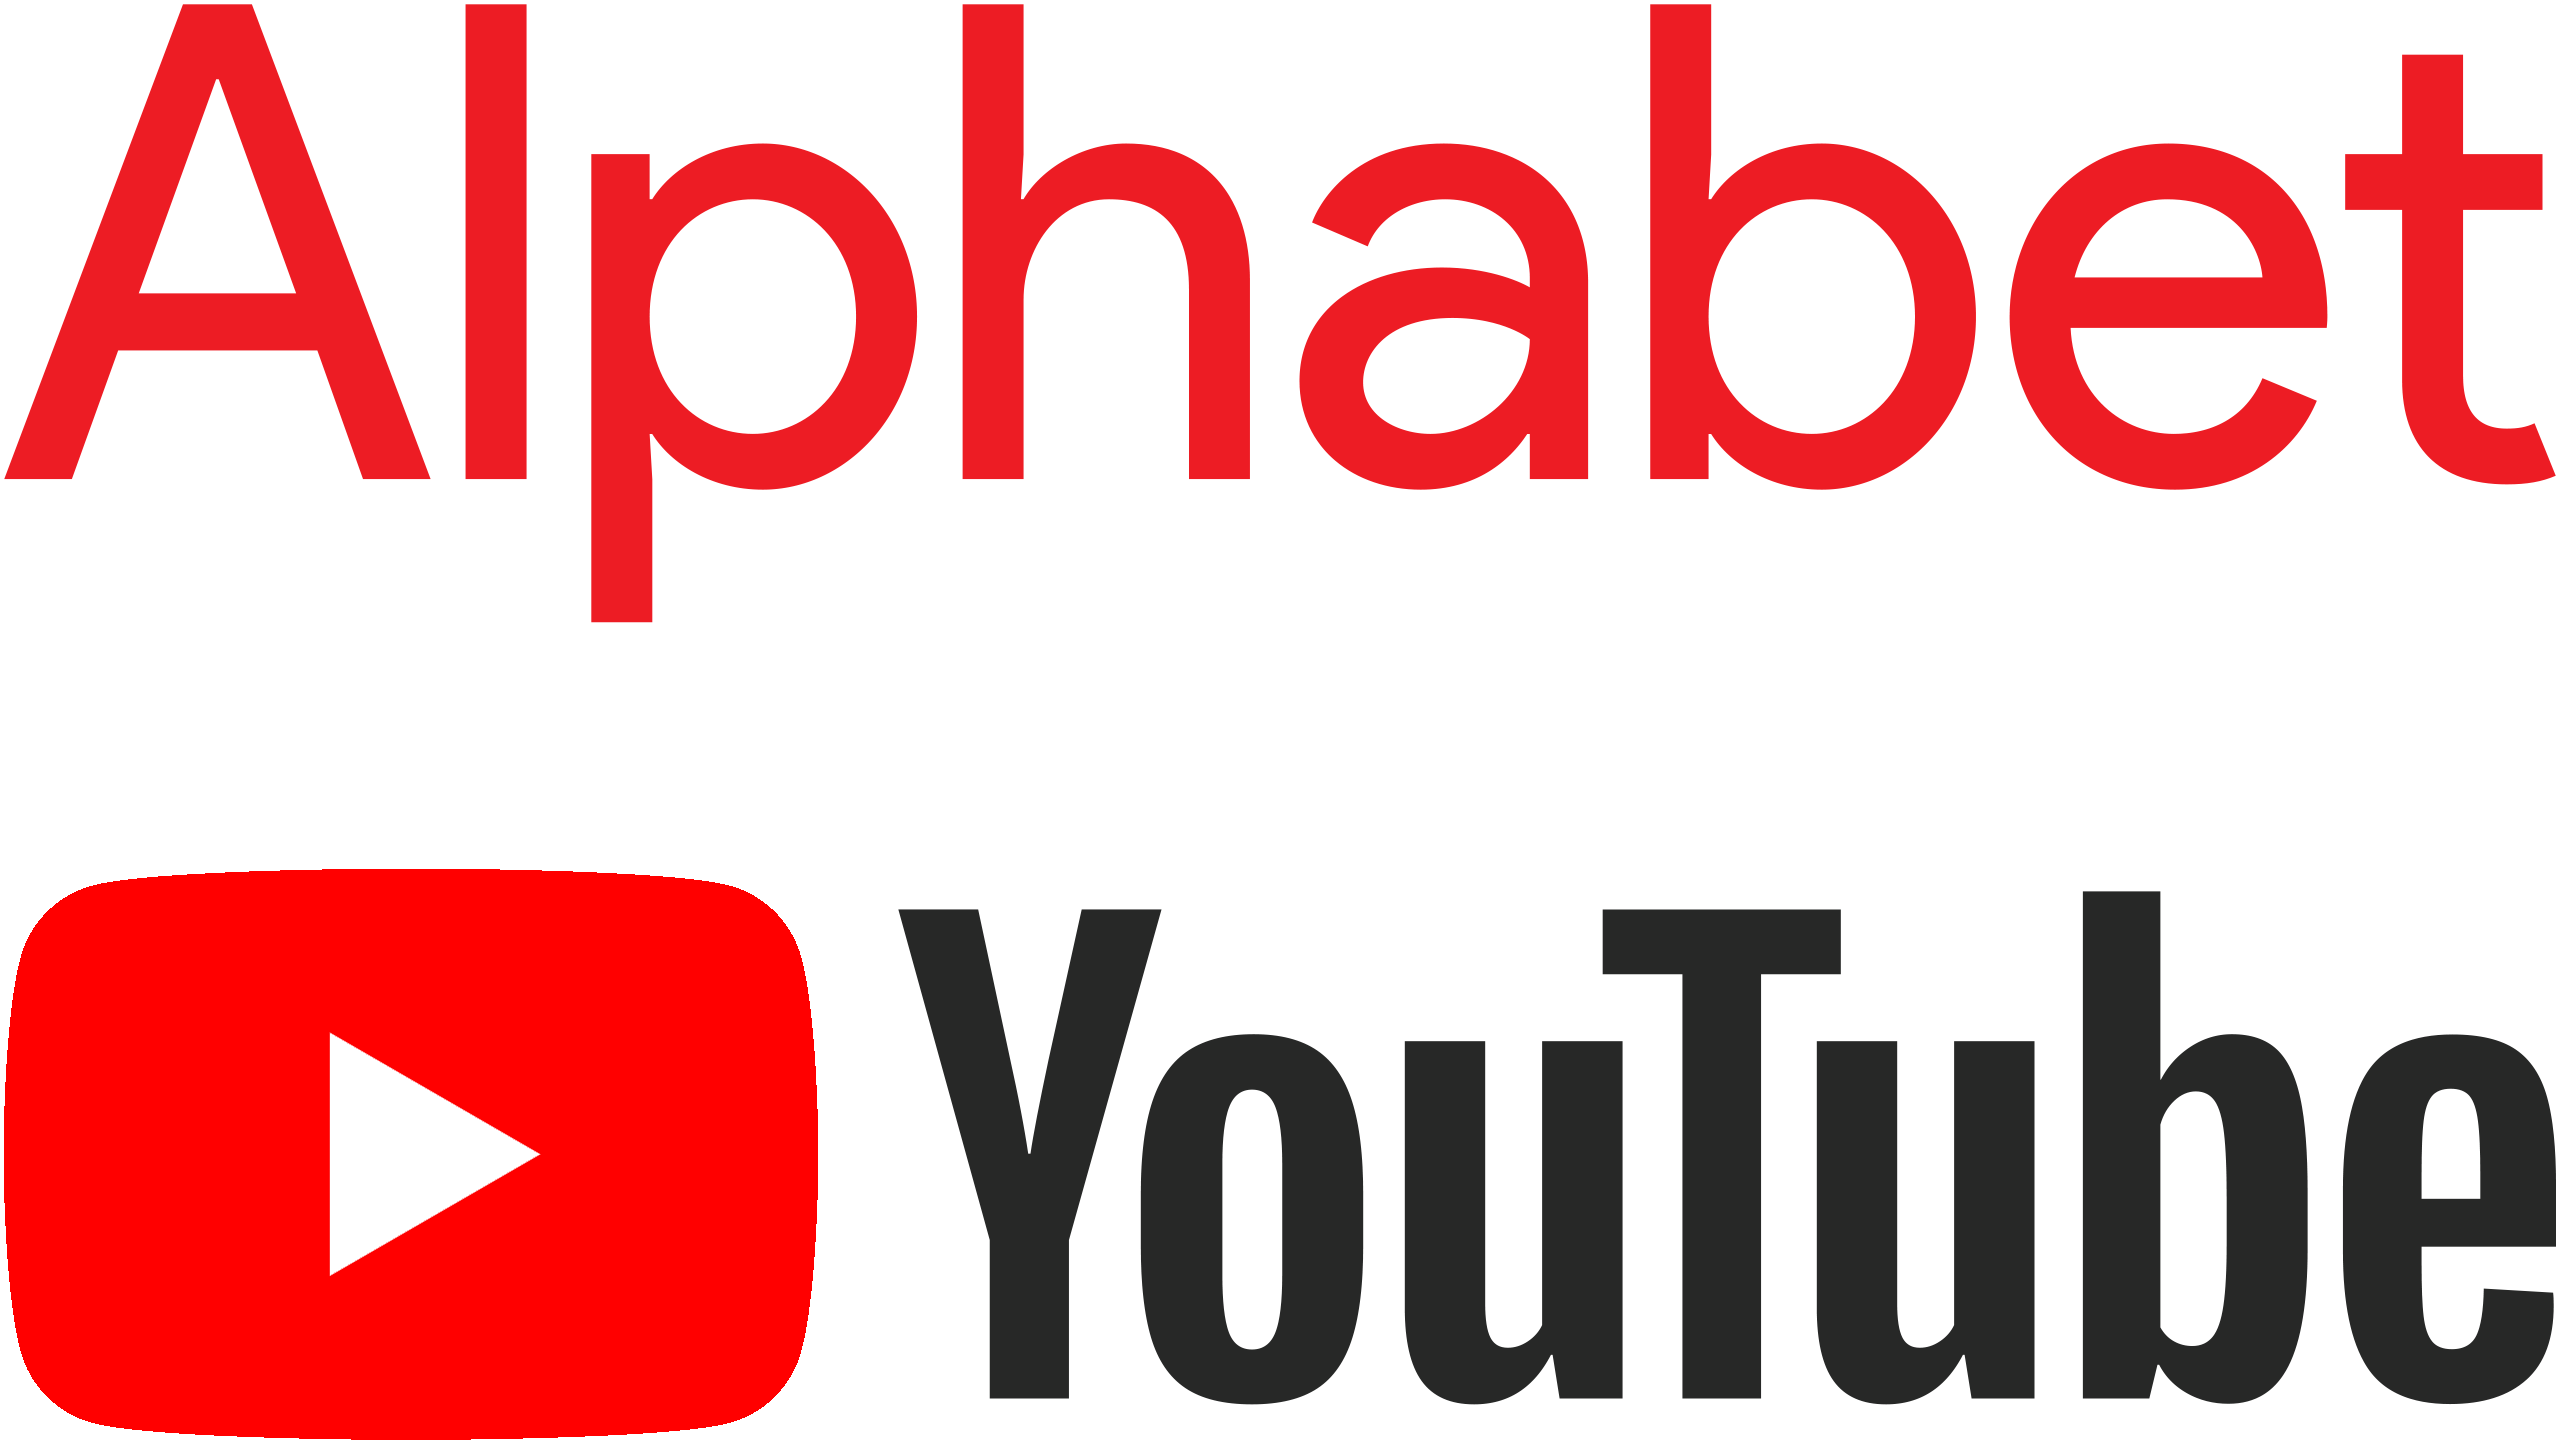 YouTube reports $7 billion in ad revenue – Q2 2021 earnings